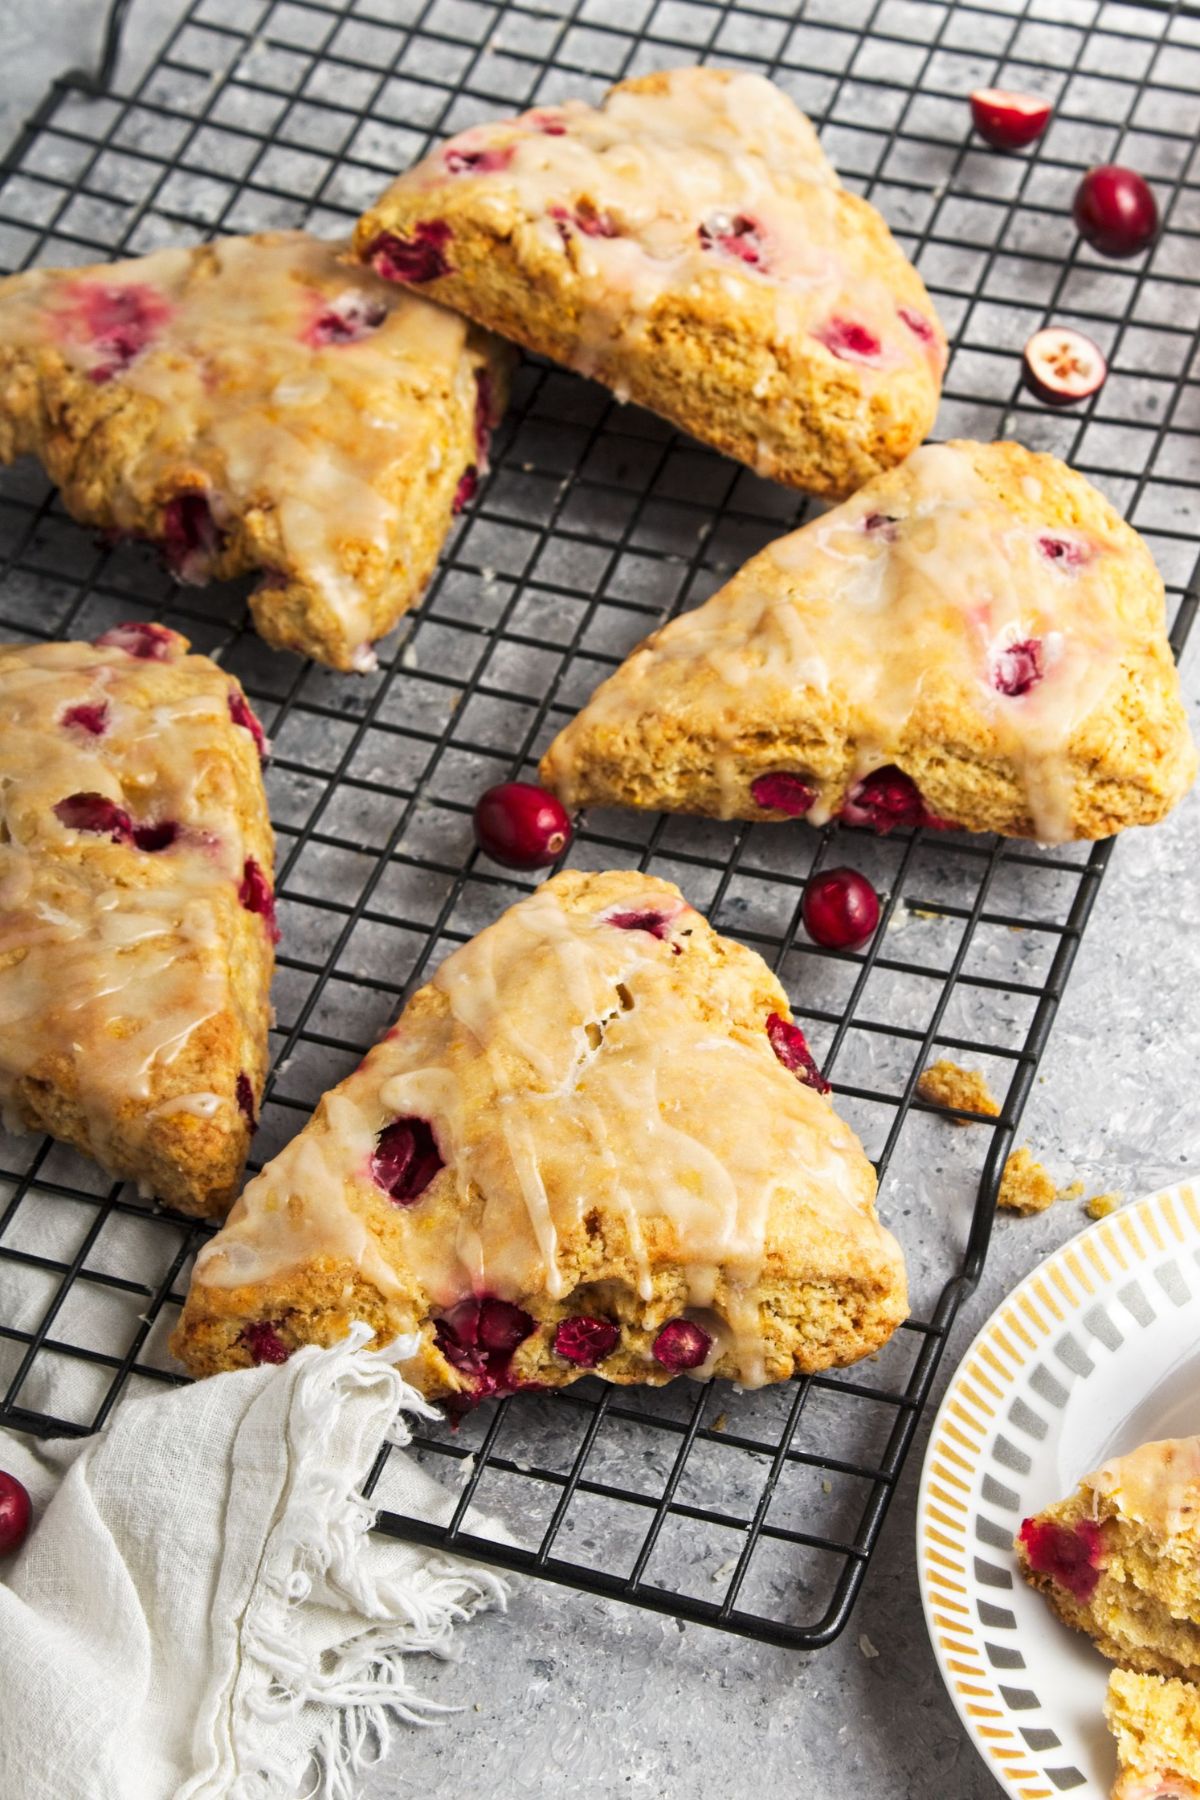 A few homemade Orange cranberry scones on a wire rack.